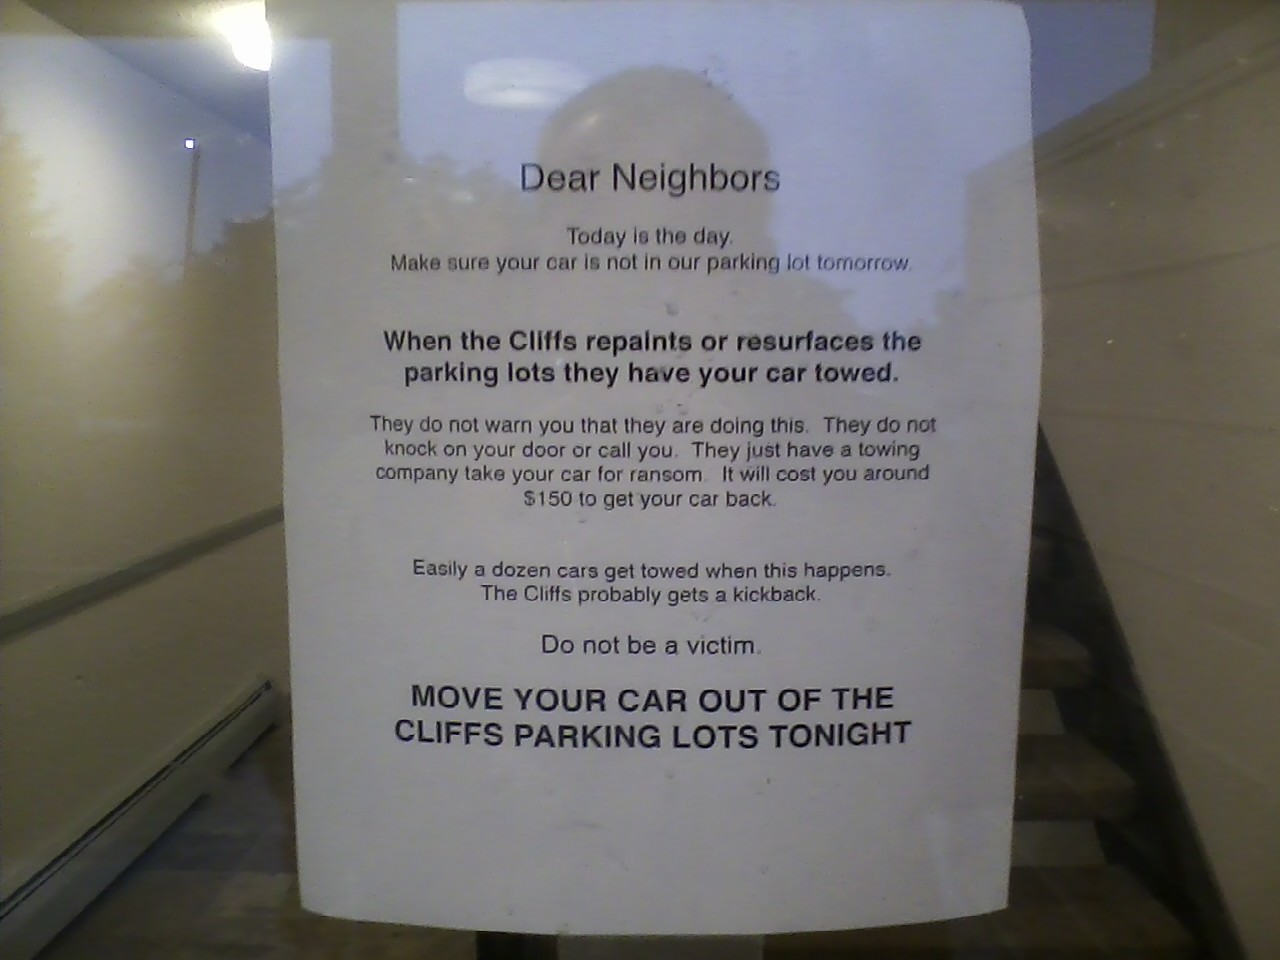 The apartments would tow your car without warning, so residents tried to warn each other.